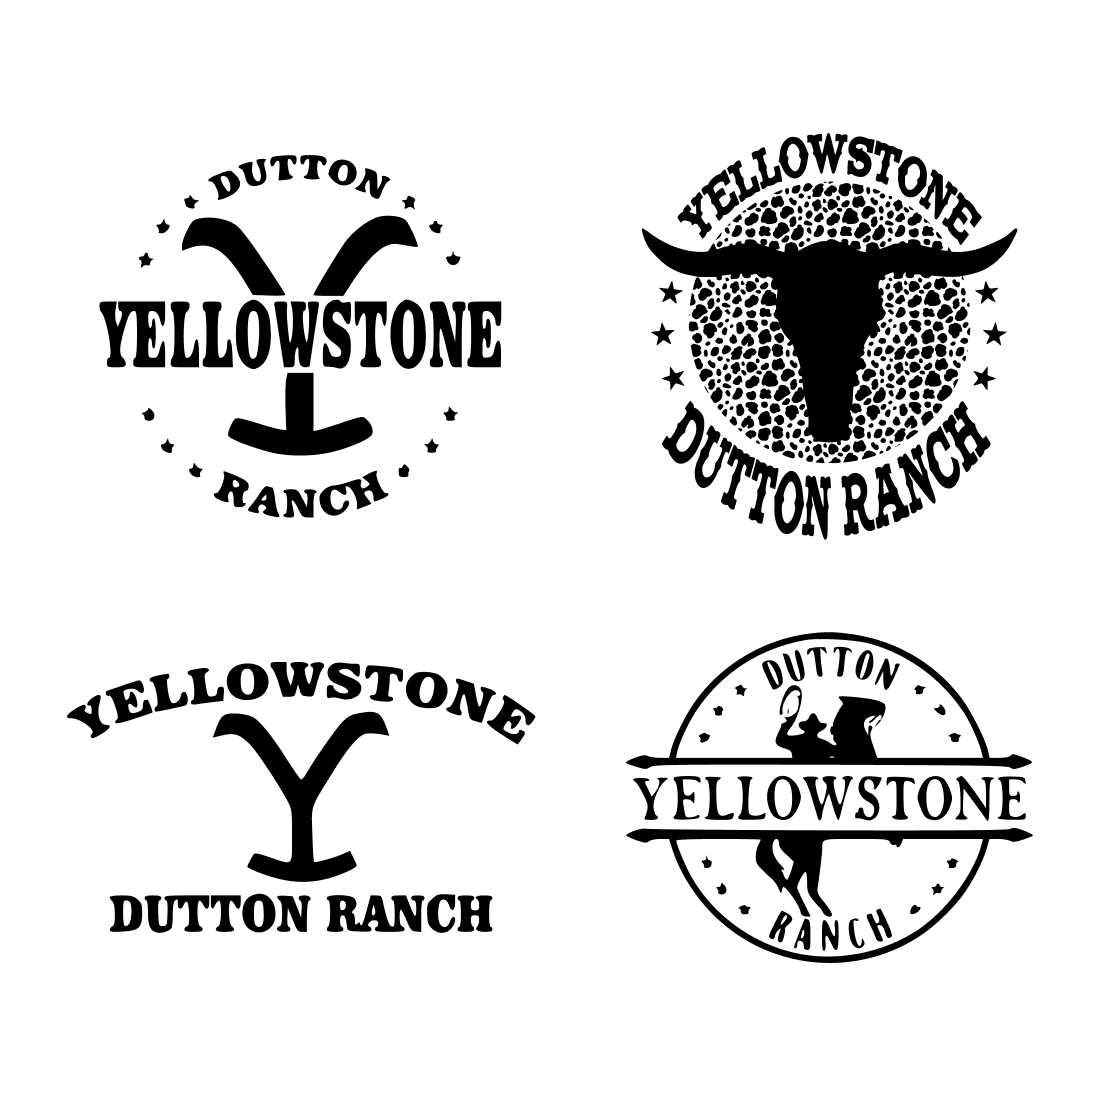 Yellowstone Dutton Ranch SVG cover.